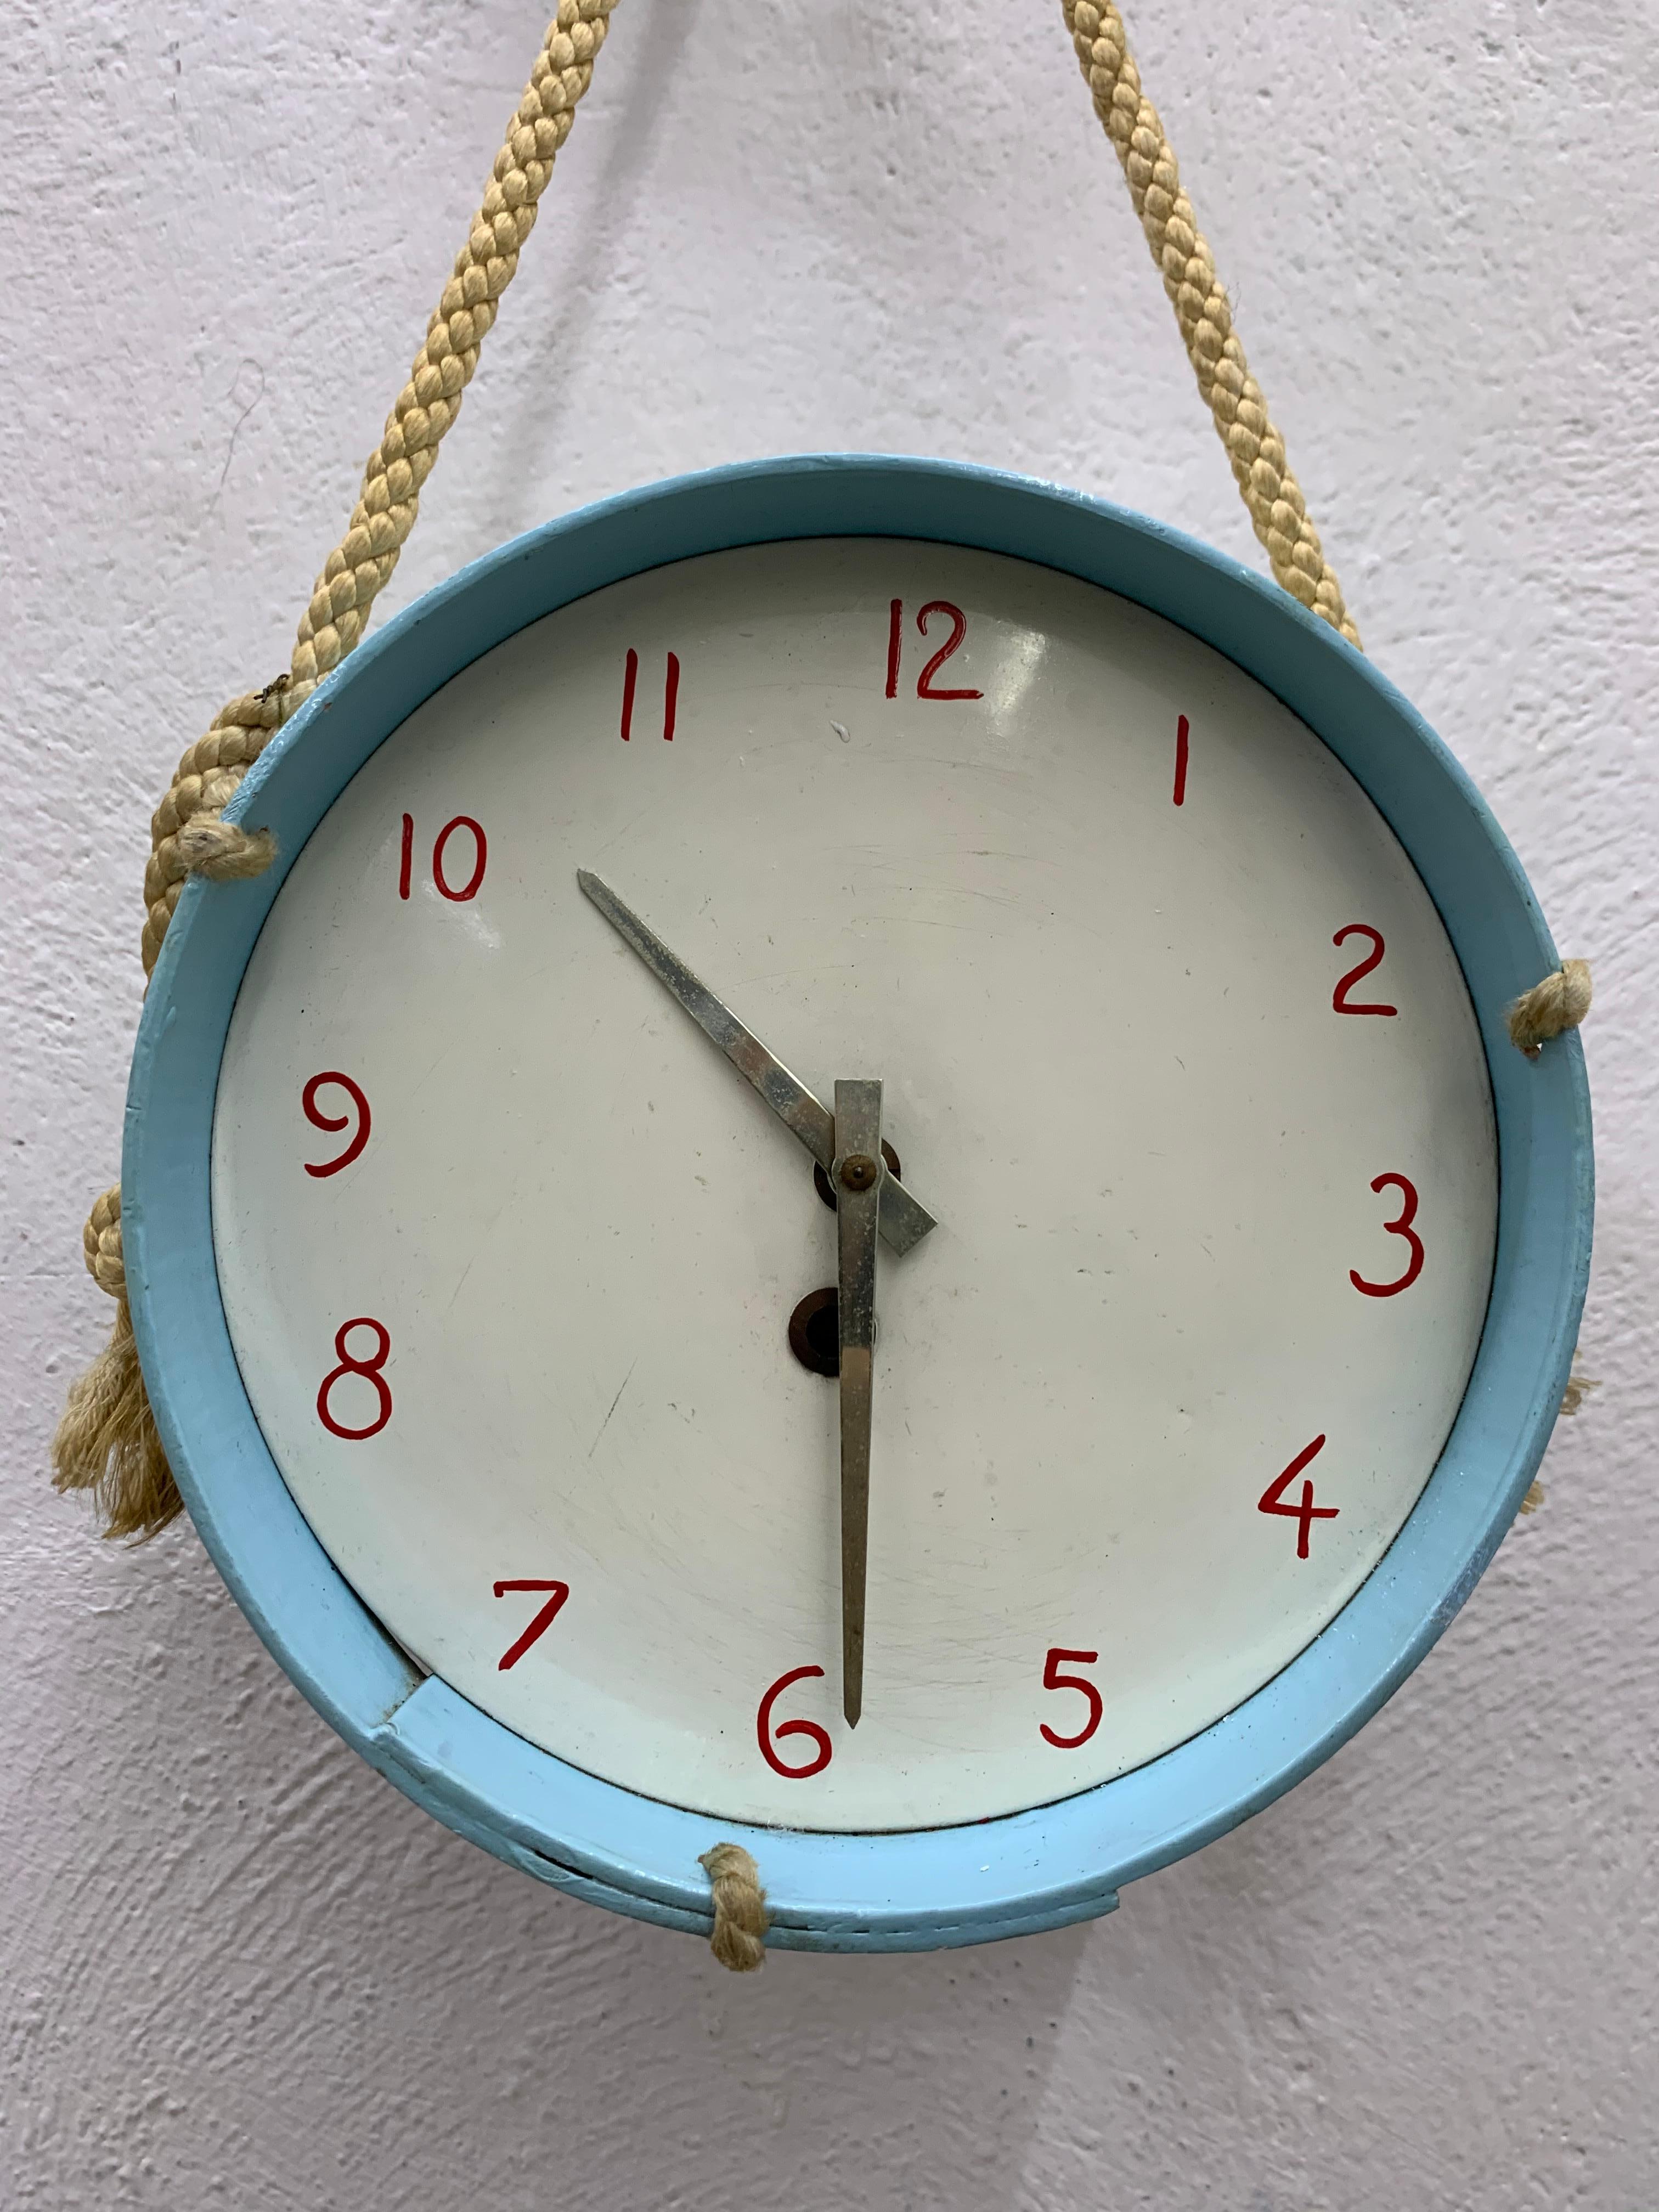 French mechanical clock, designed as a set of drums by Suzanne Bonnichon for Jacques Adnet, part of her line for children rooms' furnishing.
Manufactured in painted wood, brass, cord, and hand painted numerals, circa 1952.
Original wind-up key is